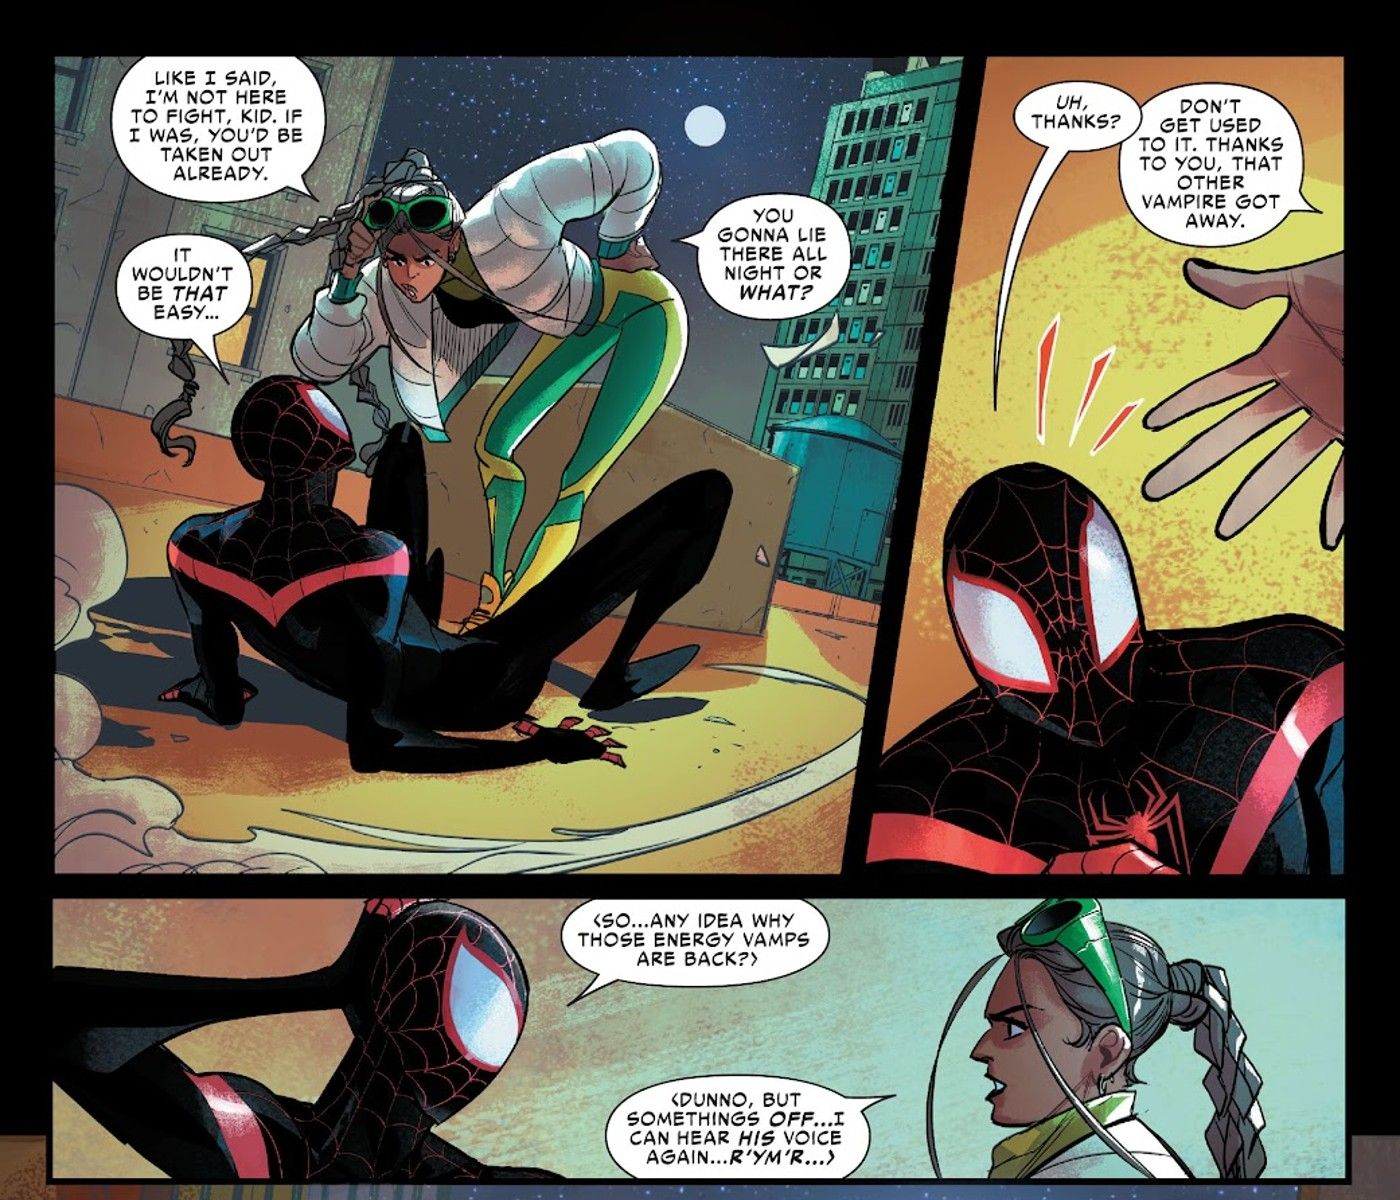 Hightail tells Miles Morales Spider-Man that Rymr the vampire is back